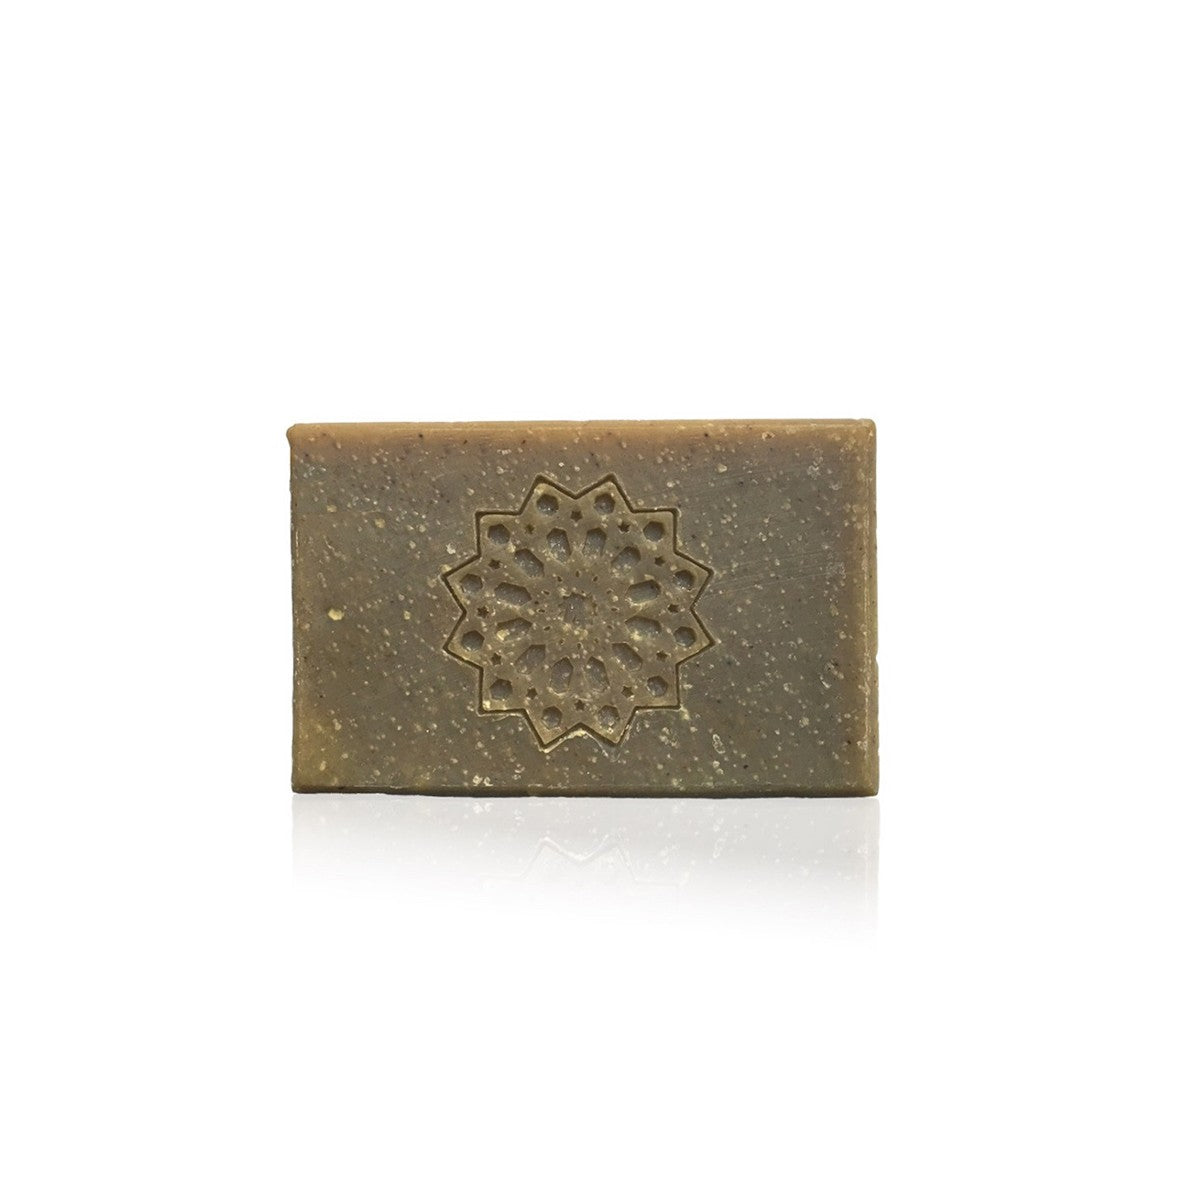 Amber Solid Soap - Relaxing Melchior & Balthazar